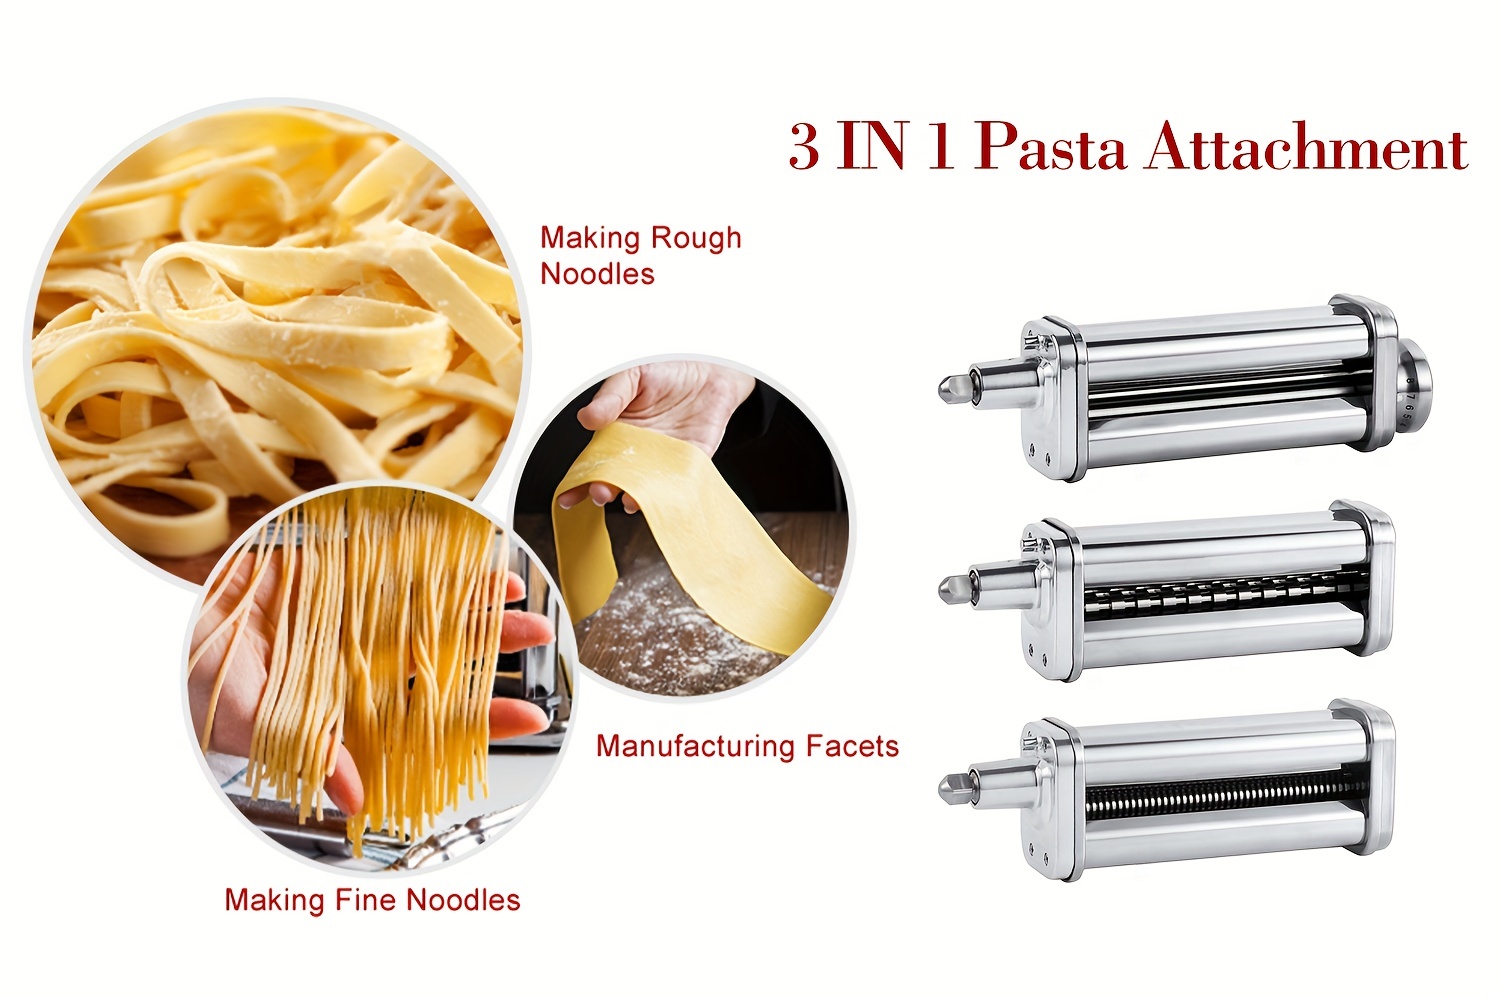 Pasta Maker Attachments Set For All Kitchenaid Stand Mixer, Including Pasta  Sheet Roller, Spaghetti Cutter, Fettuccine Cutter (machine/mixer Not  Included) Blender Accessories - Temu New Zealand